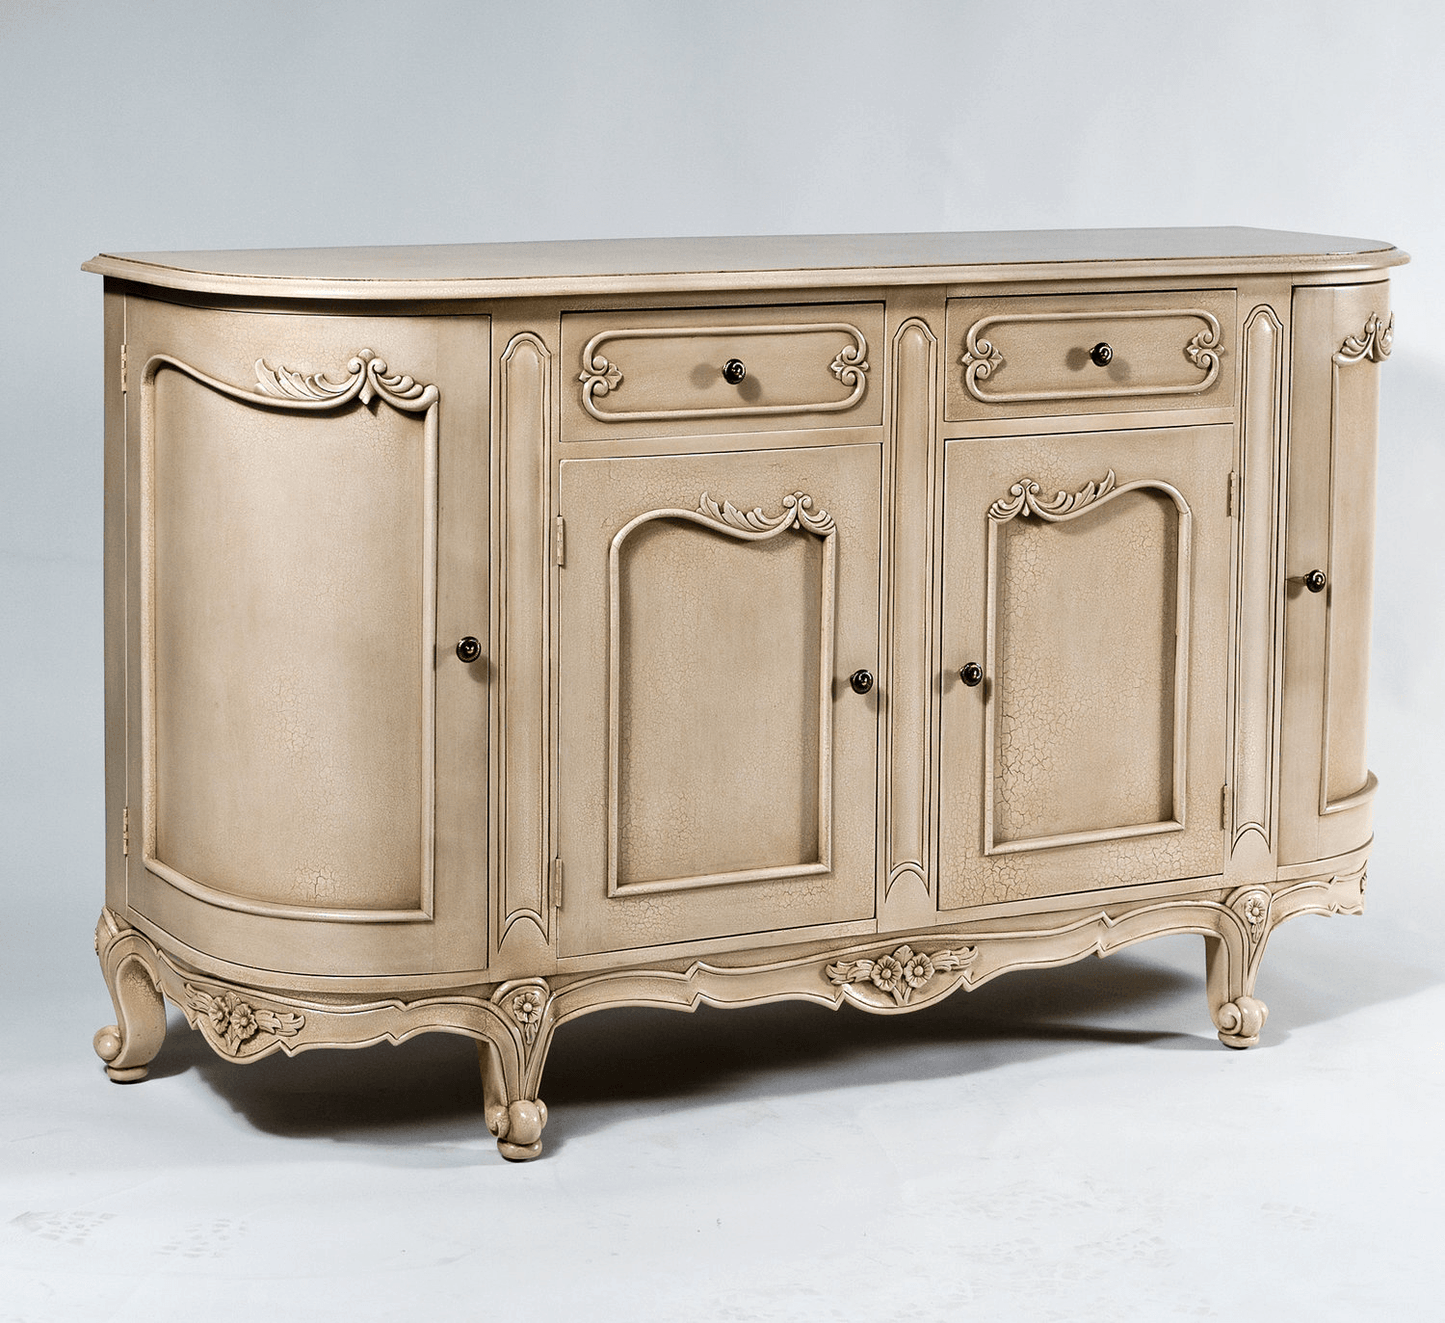 LOUIS XV STYLE SIDEBOARD - House of Chippendale